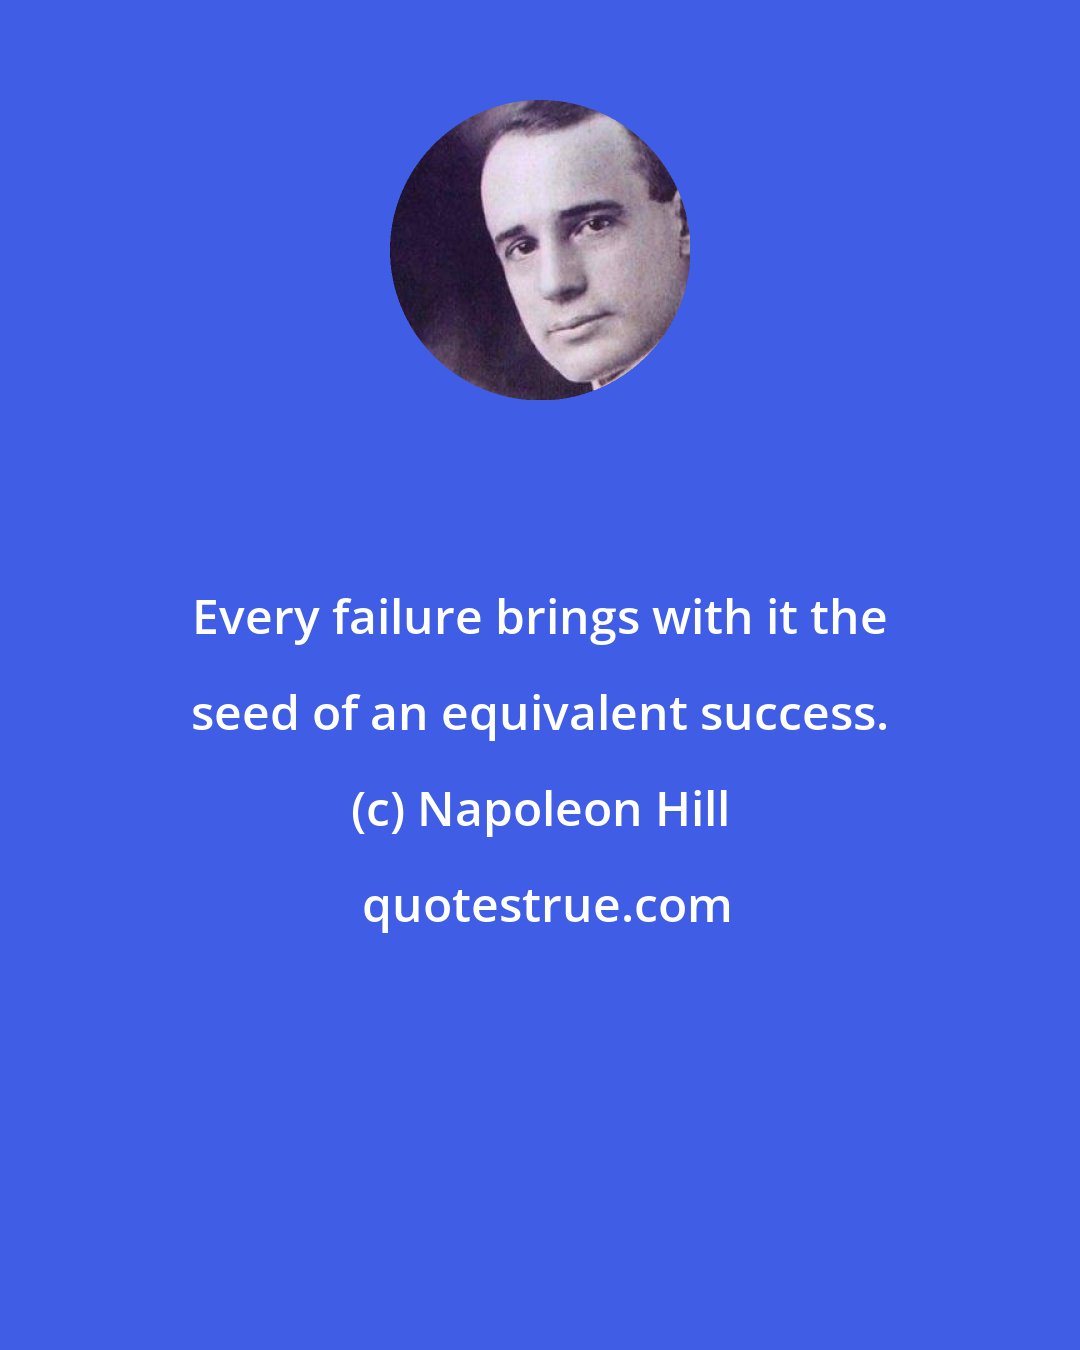 Napoleon Hill: Every failure brings with it the seed of an equivalent success.